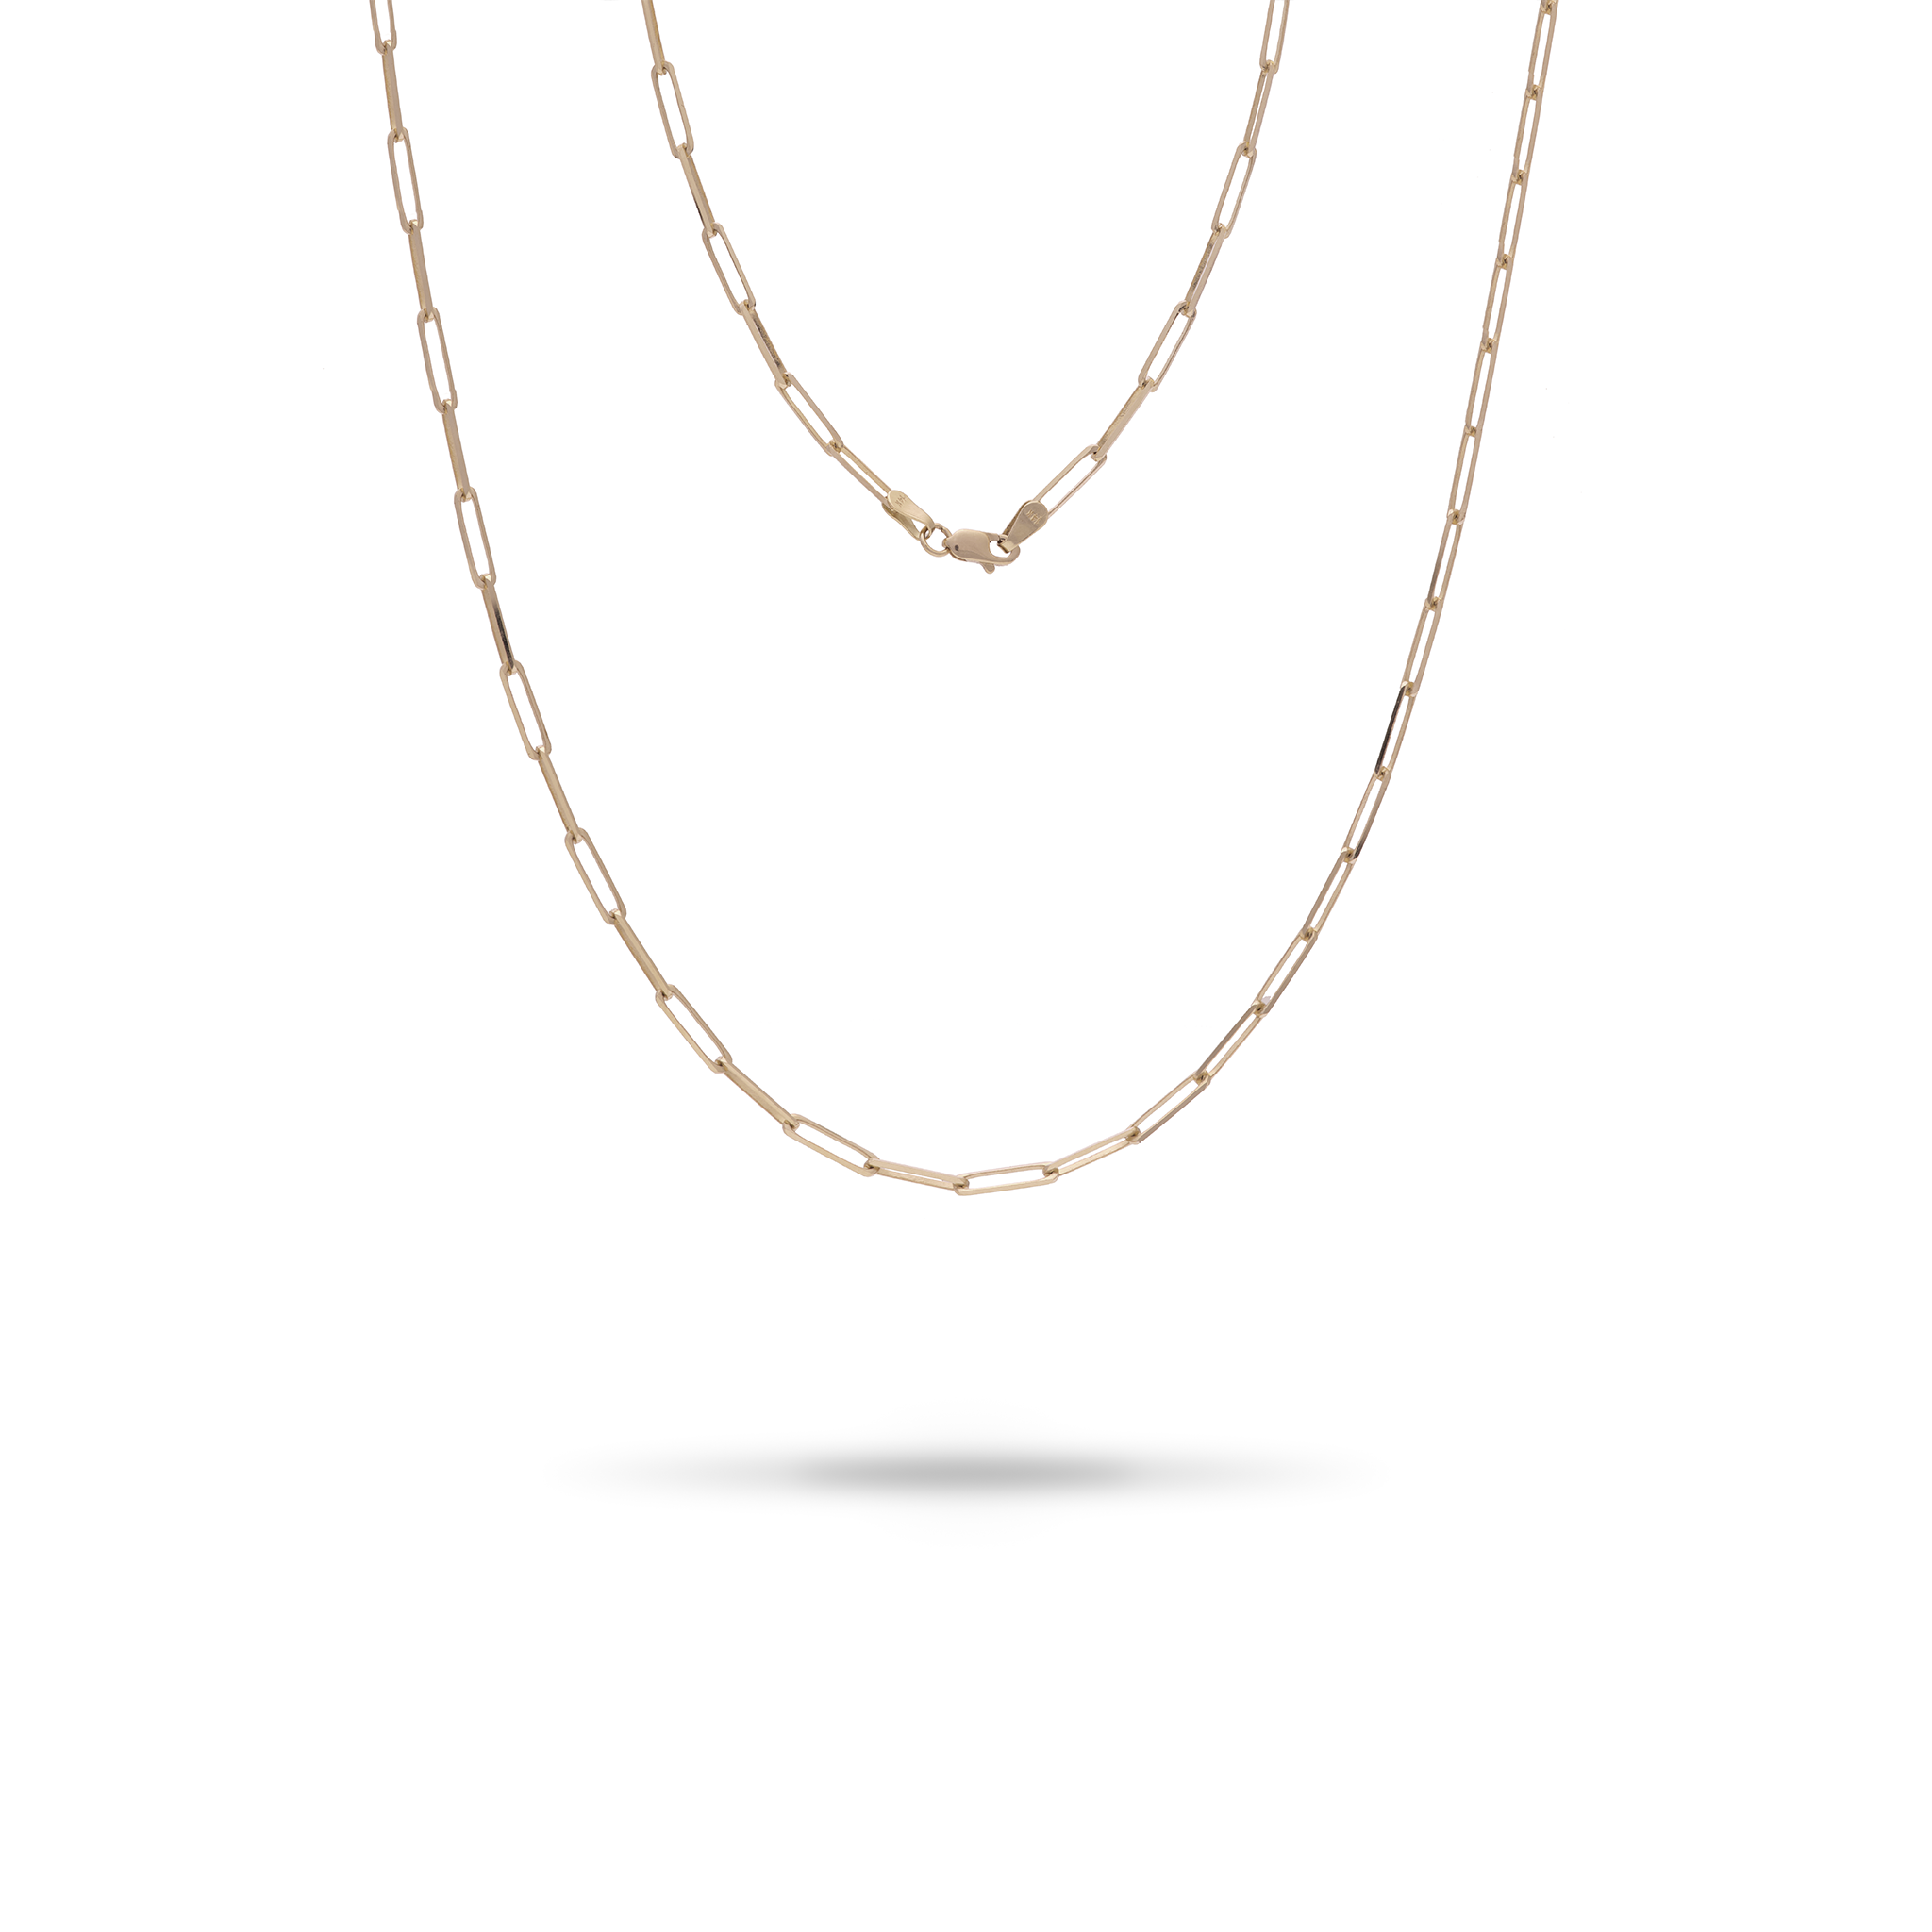 2.7mm Paperclip Chain in Gold